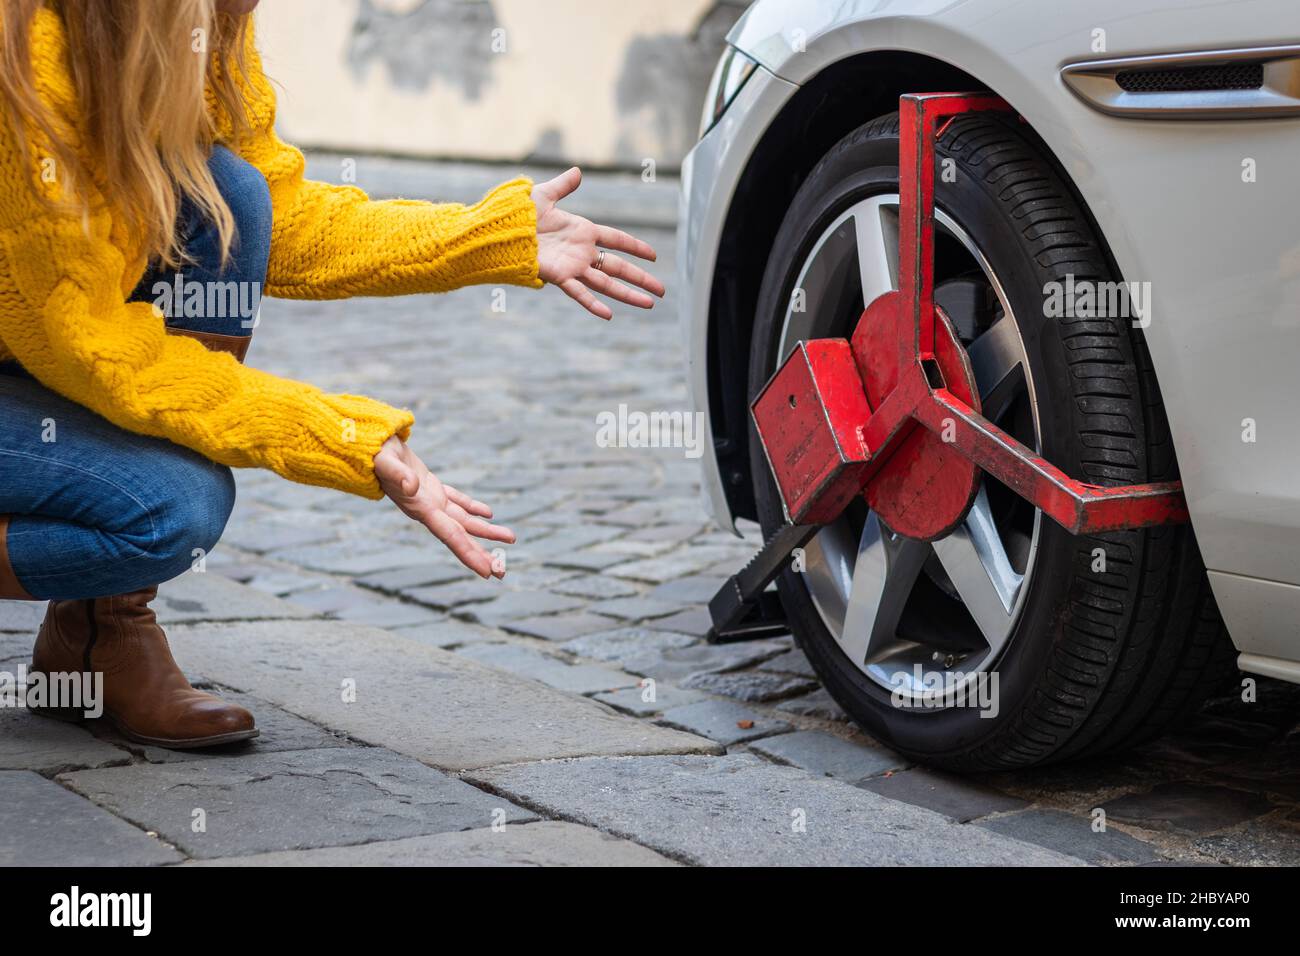 Upset woman looks at her parked car with wheel clamp. Punishment for illegal parking at street. Stock Photo